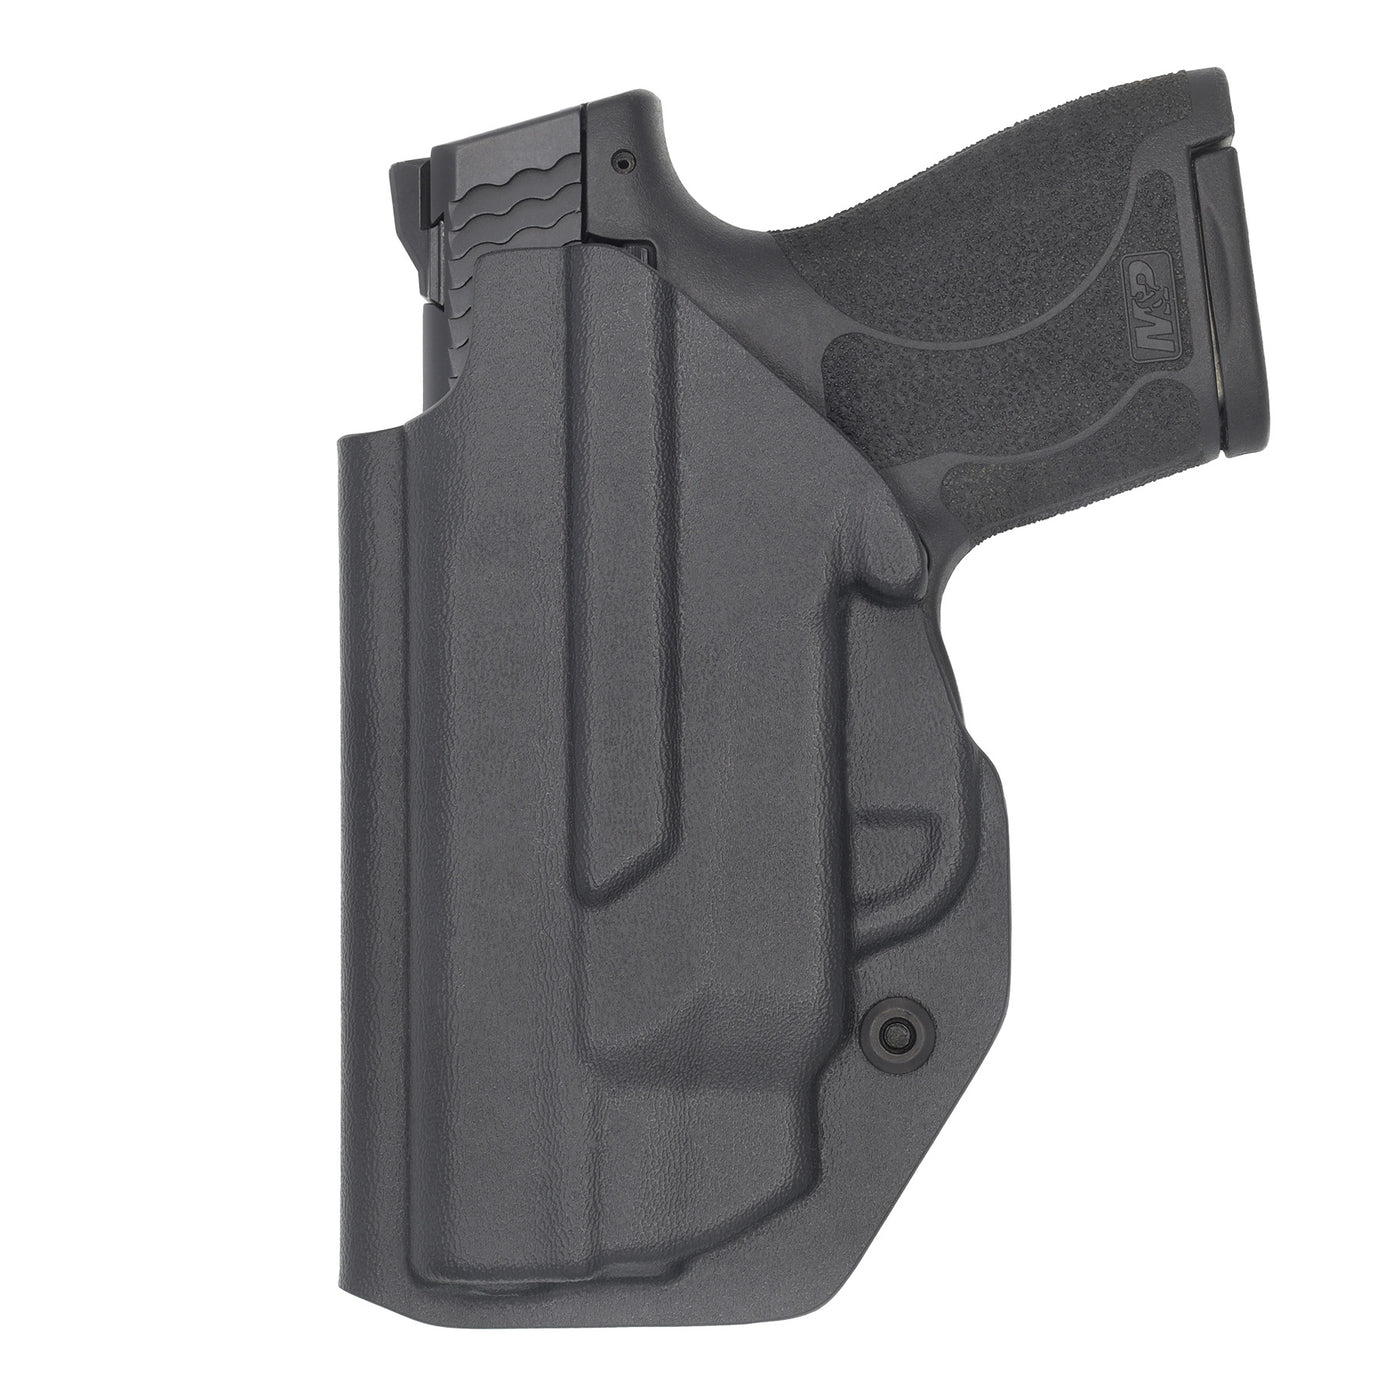 C&G Holsters IWB custom inside the waistband Tactical Holster for the M&P Shield with Laser rear view with handgun